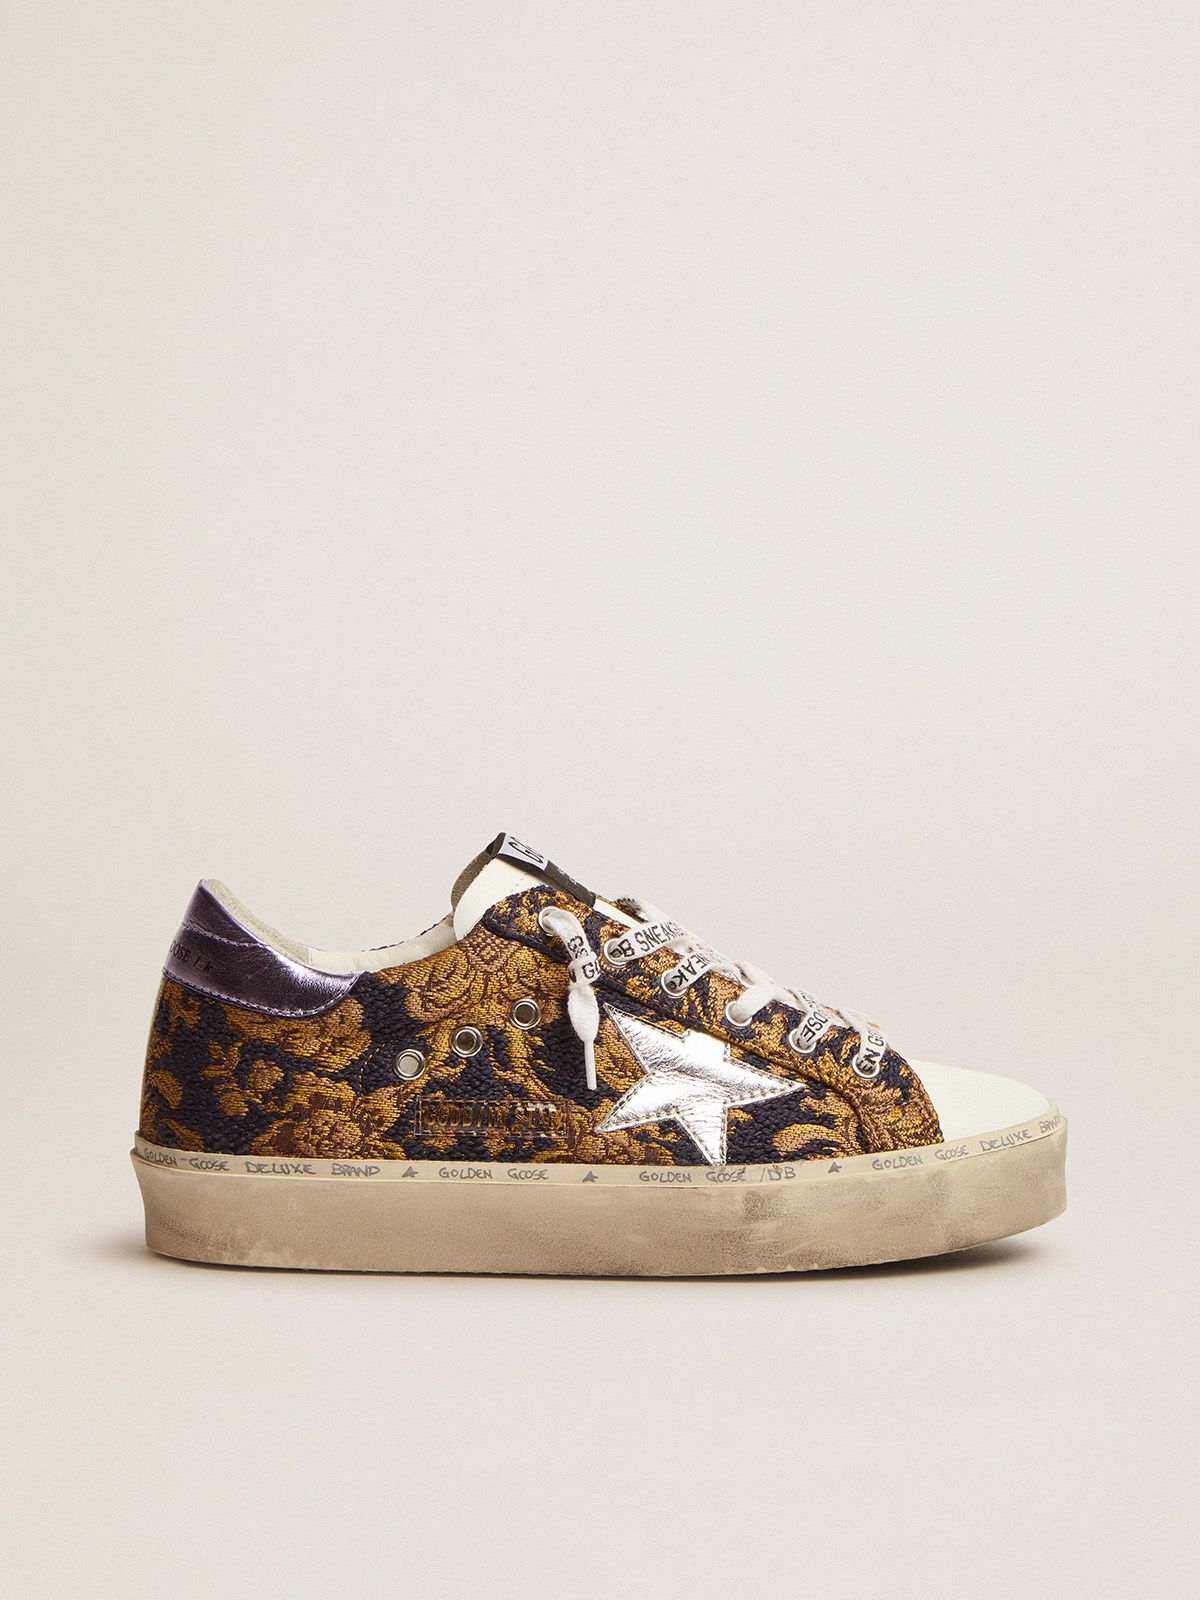 golden goose jacquard laminated in Star Hi with sneakers brocade detail